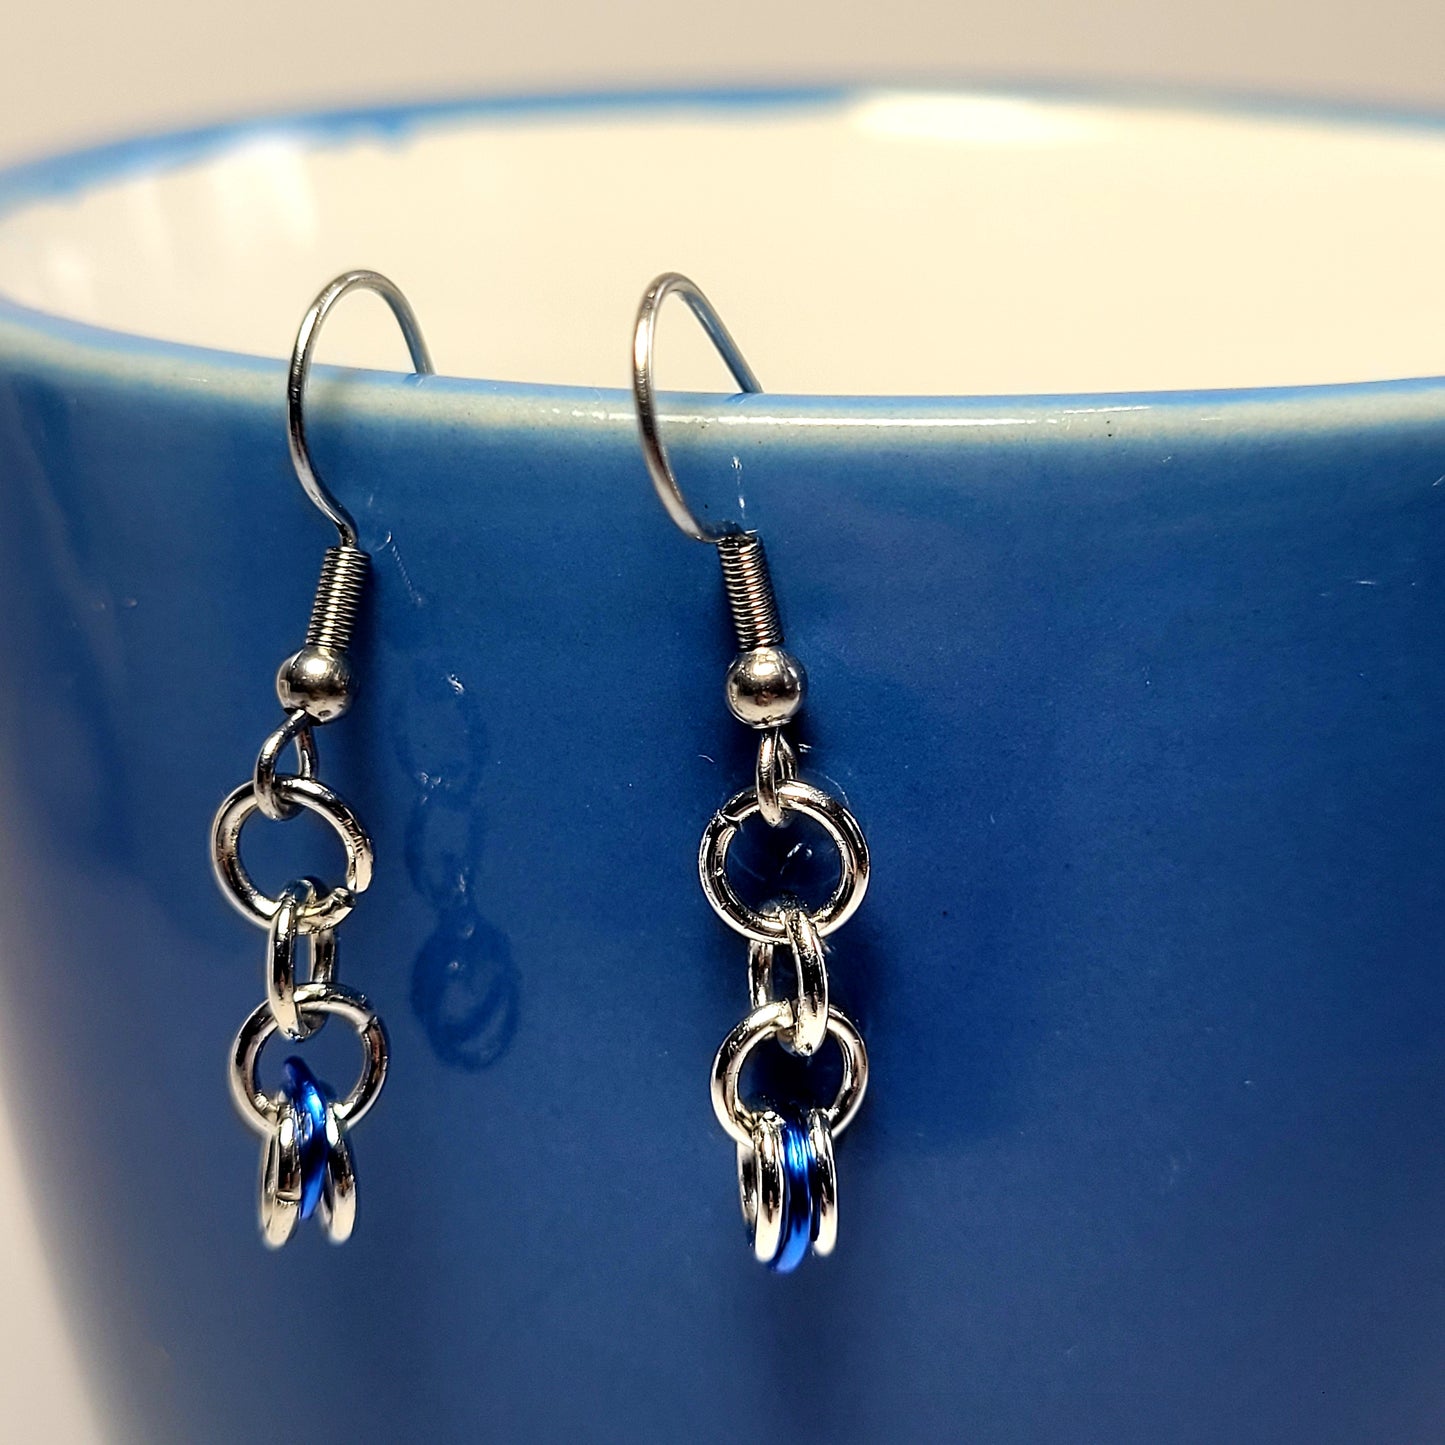 Earrings, dark blue and silver chainmail